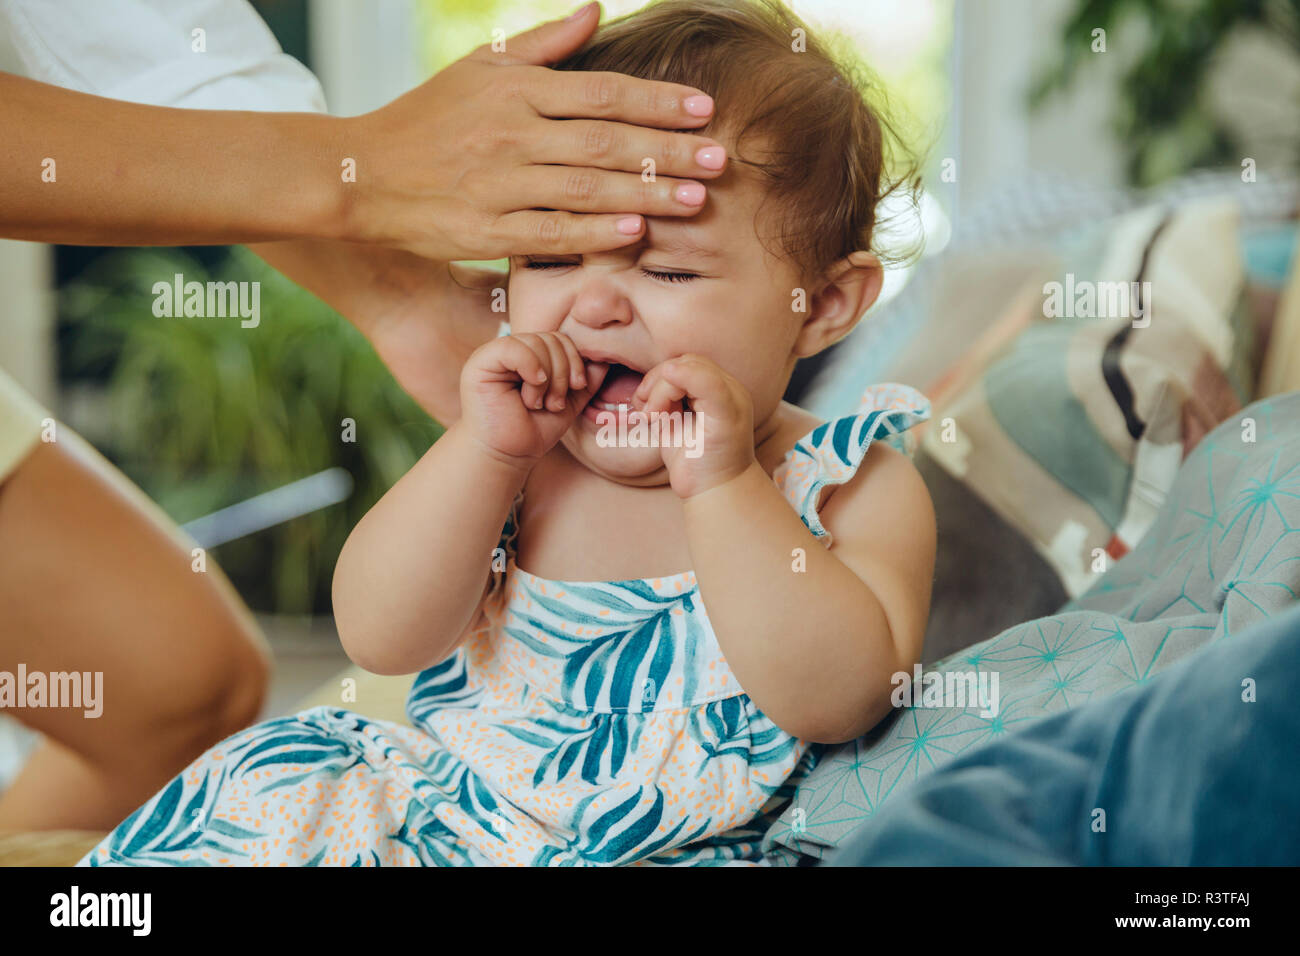 Mother taking temperature of her crying baby girl Stock Photo